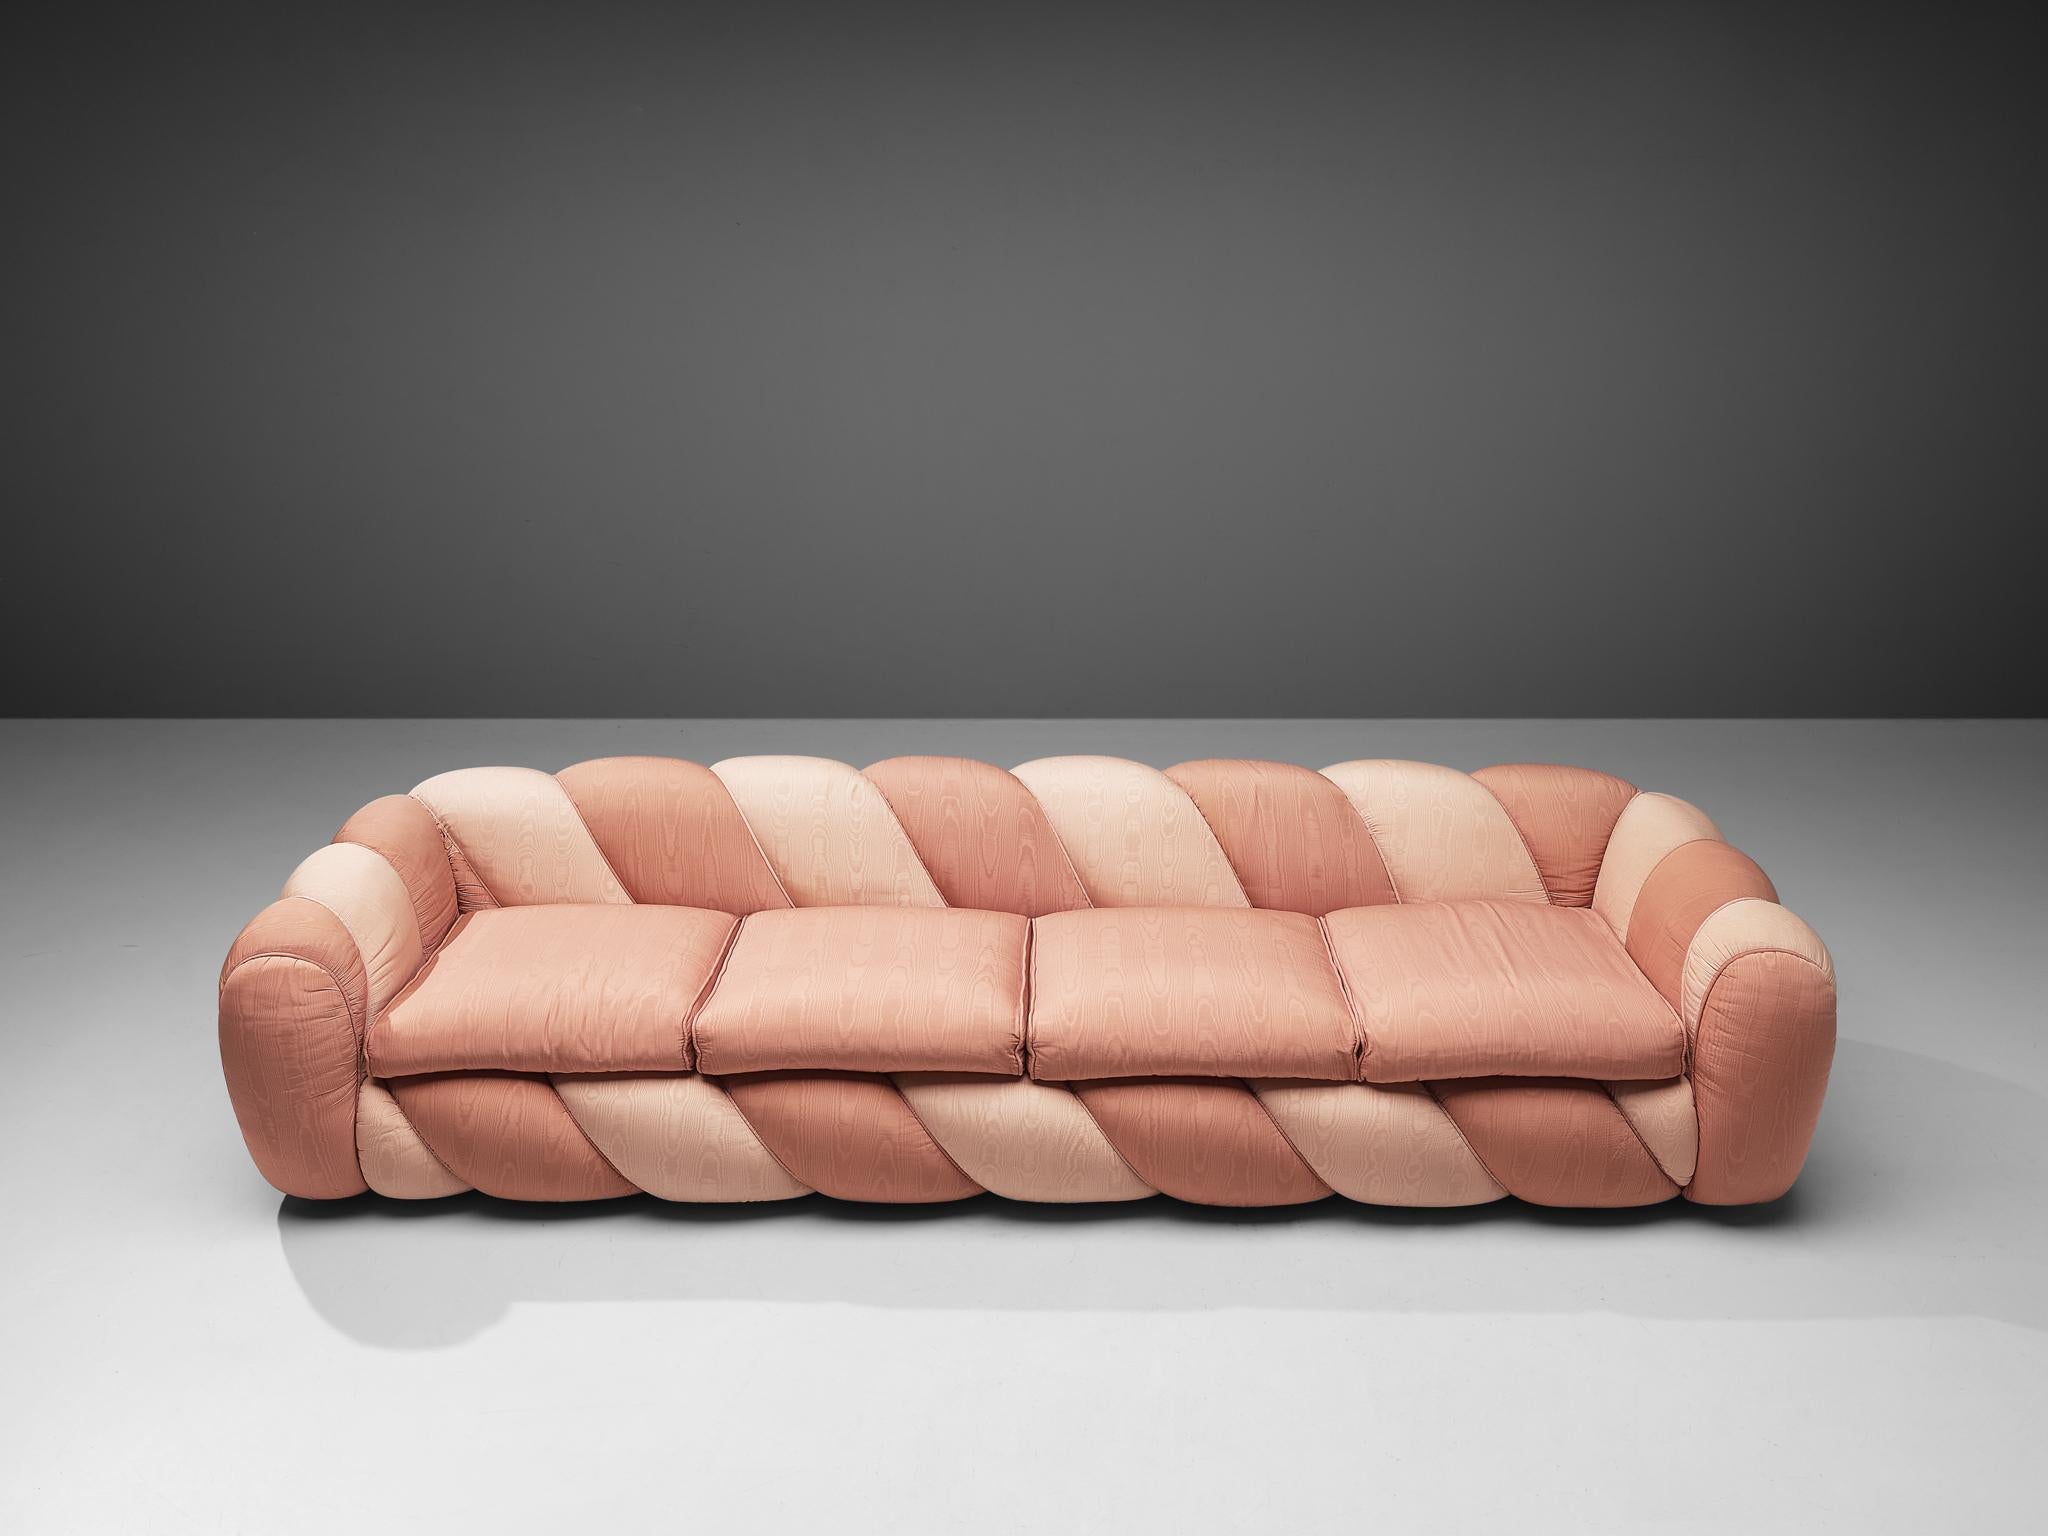 Vivai del Sud Large Four Seat Sofa in Pink Fabric Upholstery 2